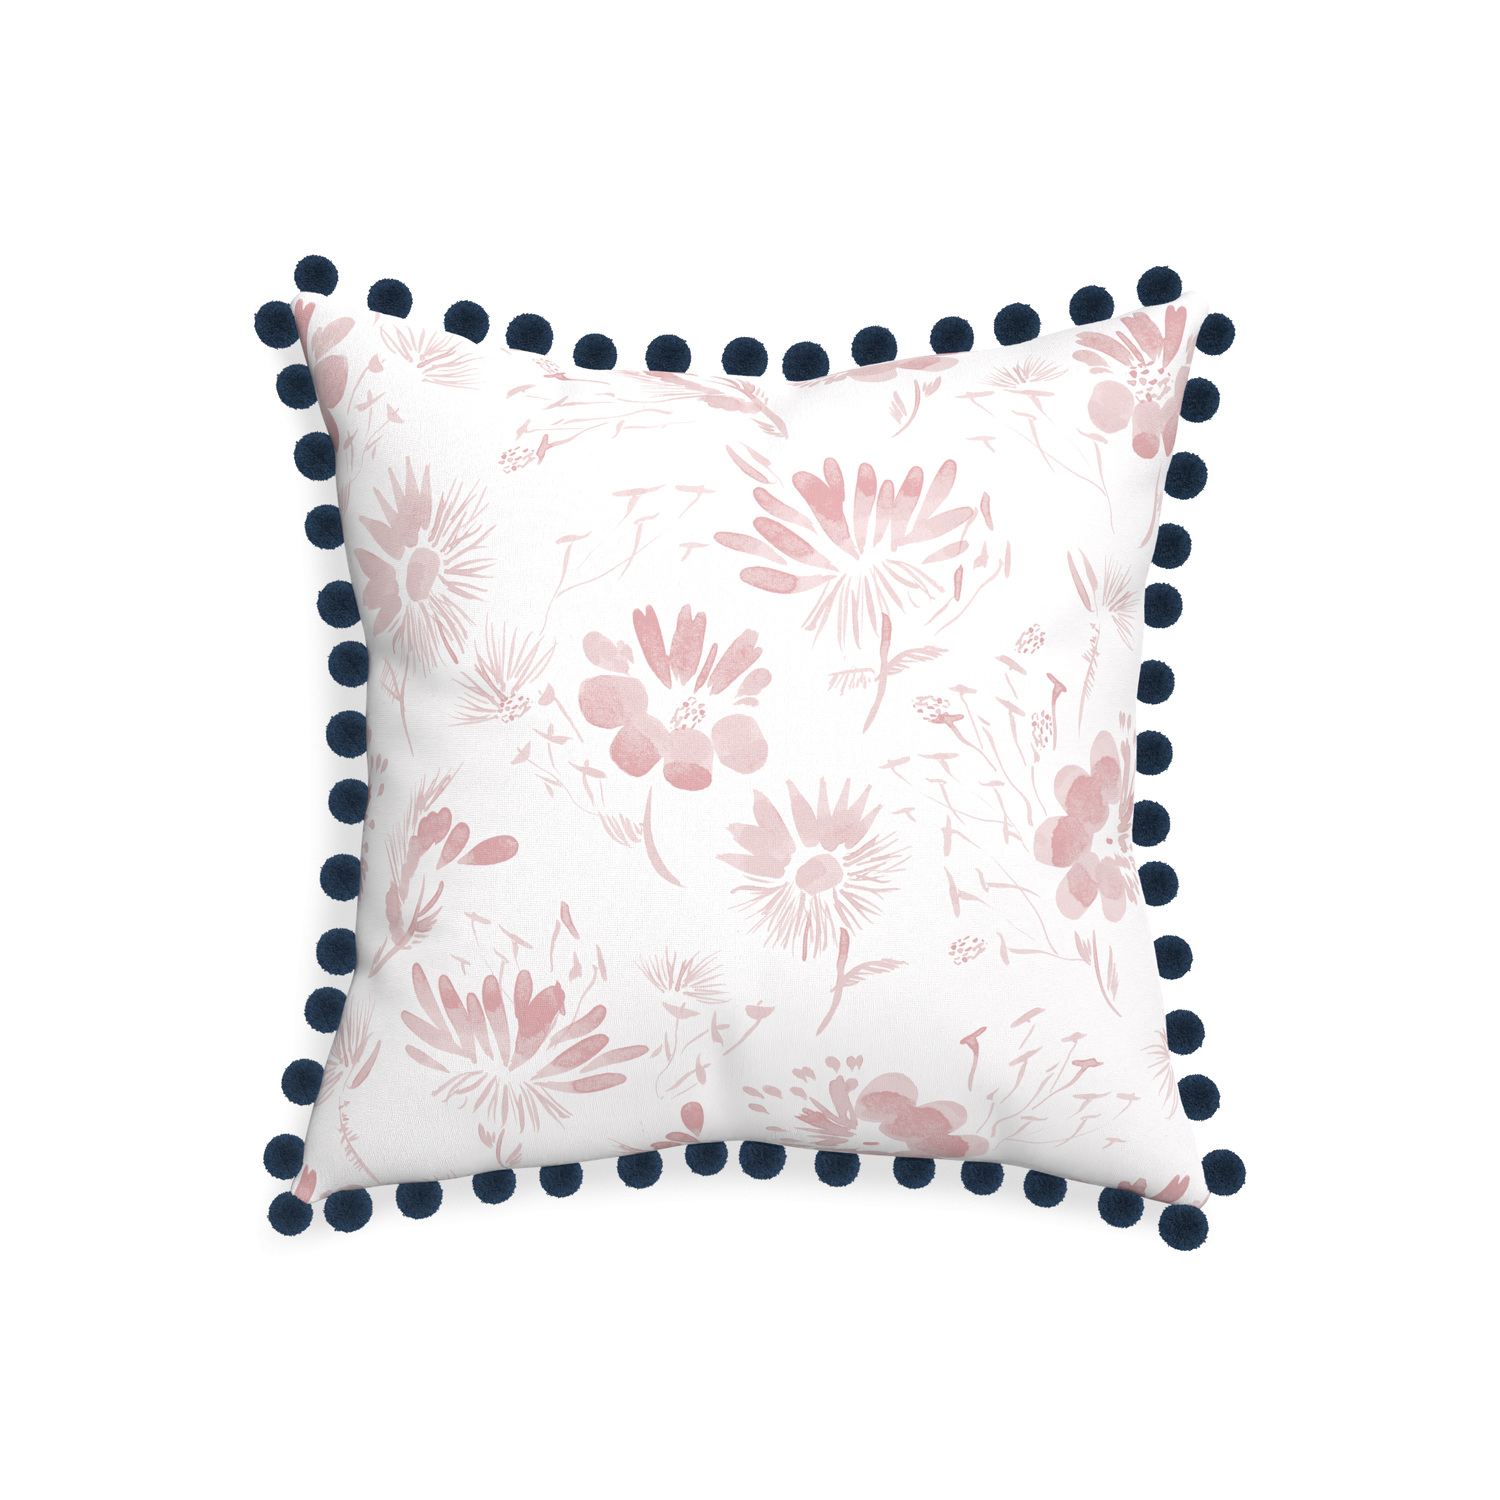 20-square blake custom pink floralpillow with c on white background